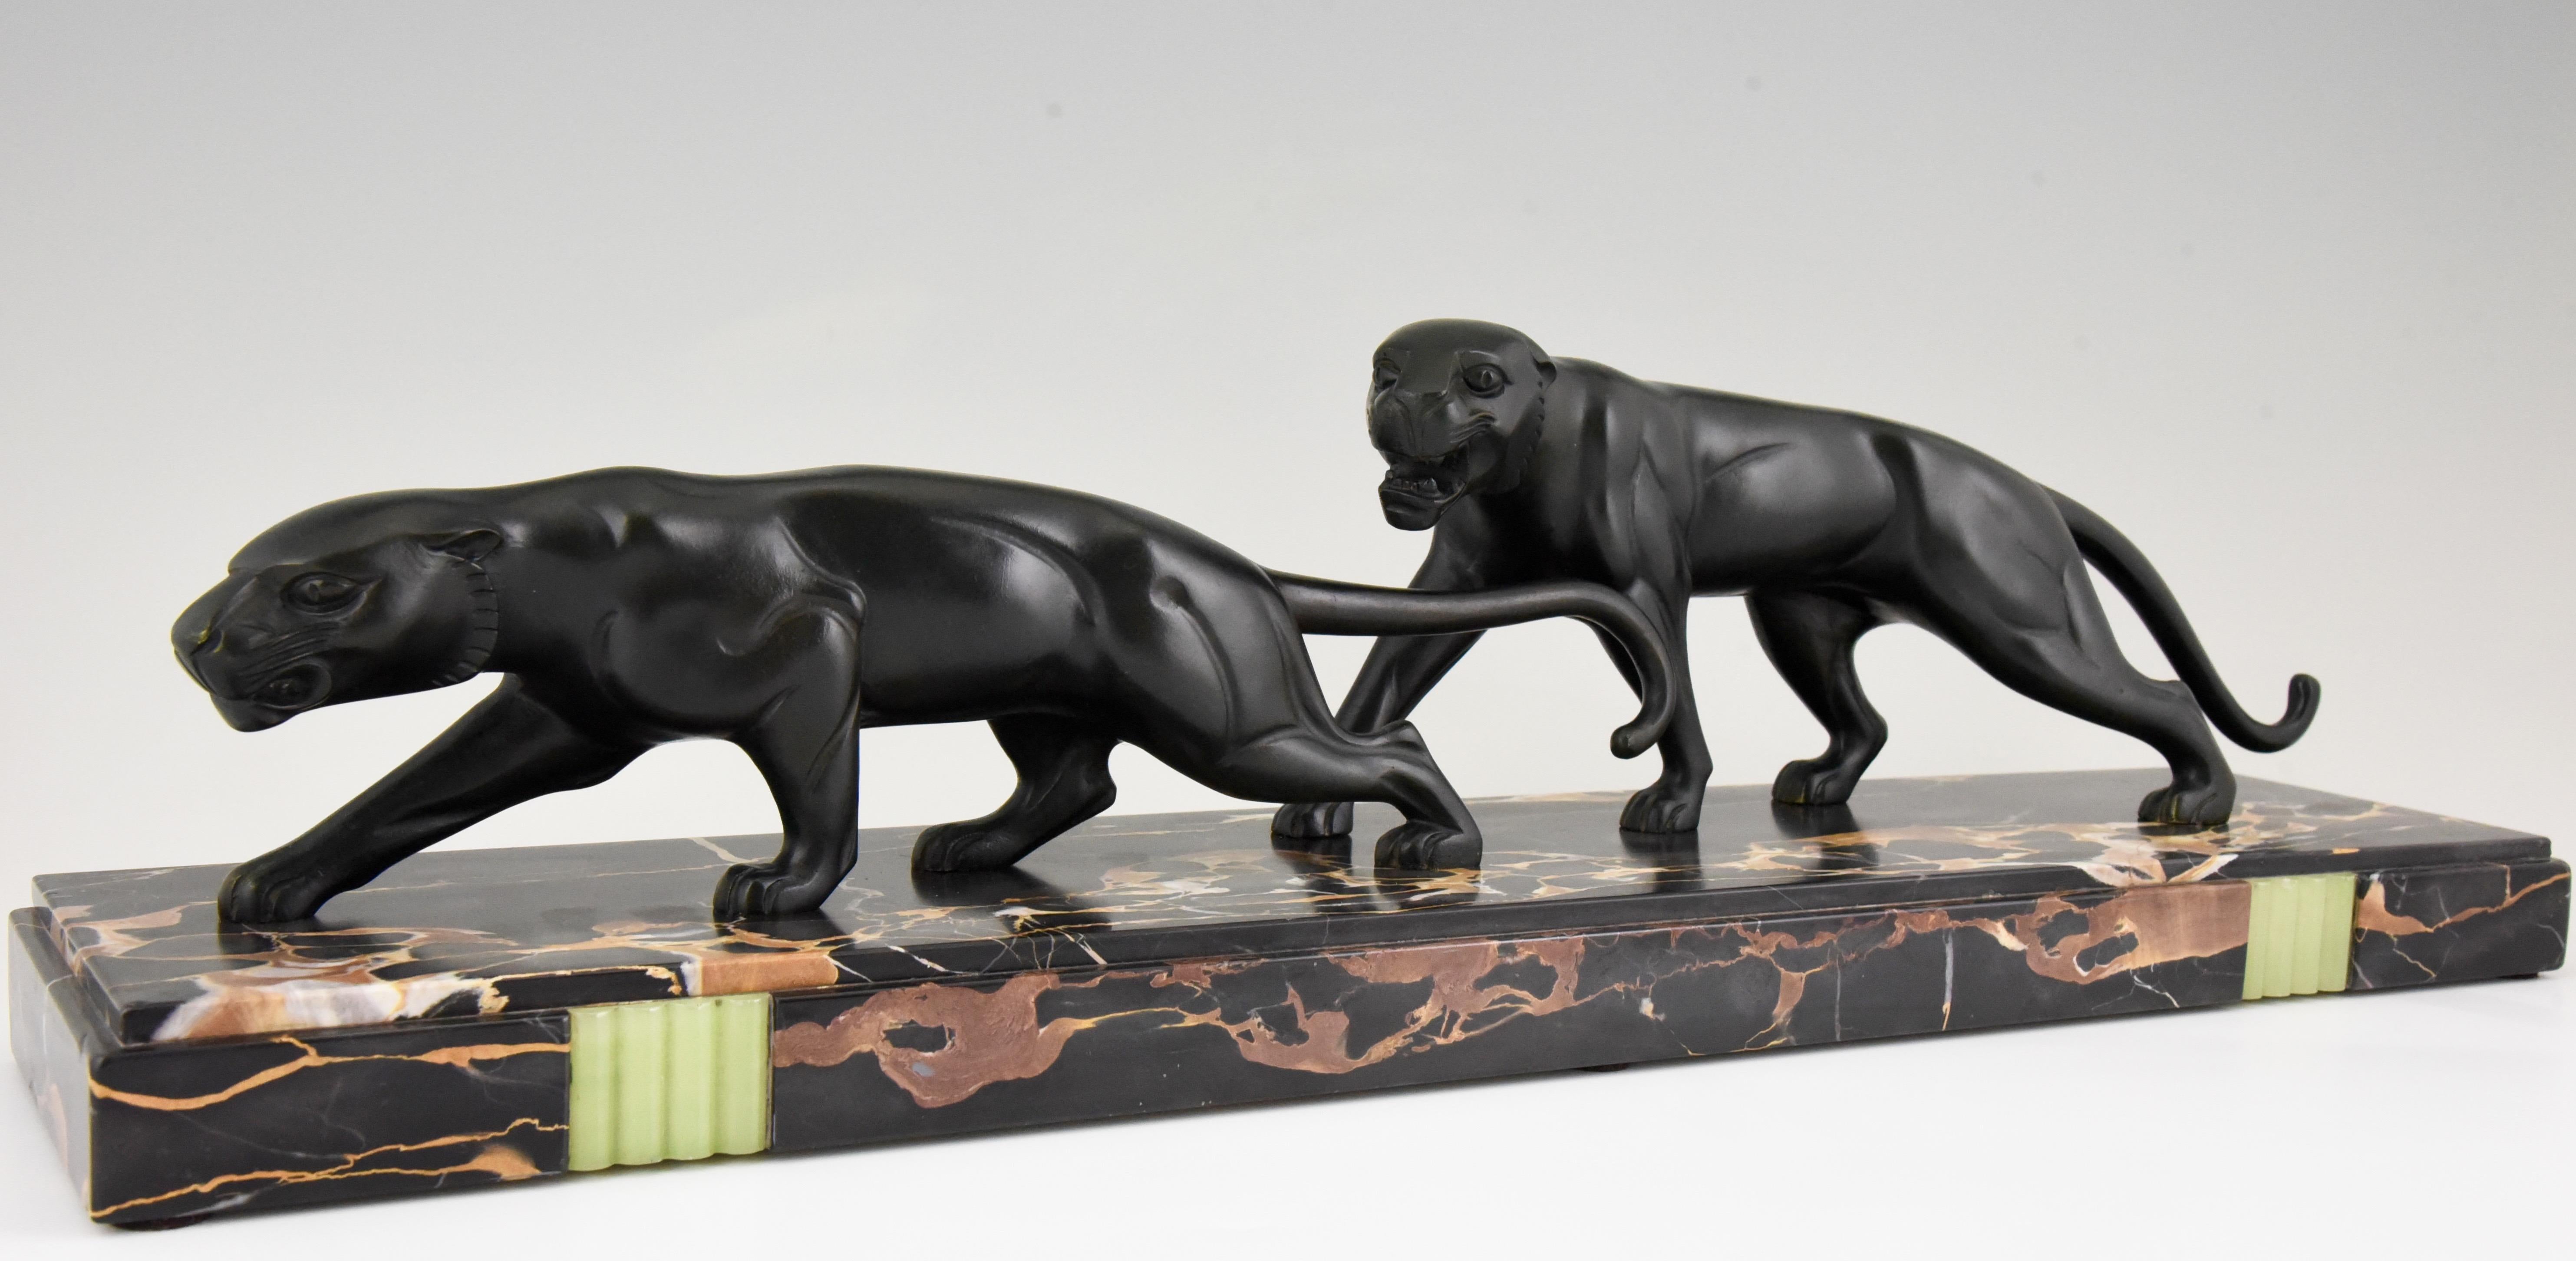 Beautiful bronze Art Deco group of two panthers by the French artist Dominique Jean Baptiste Hugues. The sculpture has a lovely patina and stands on a Portor marble base with onyx inlay. France 1930.
Literature:
“Dictionnaire des peintres,